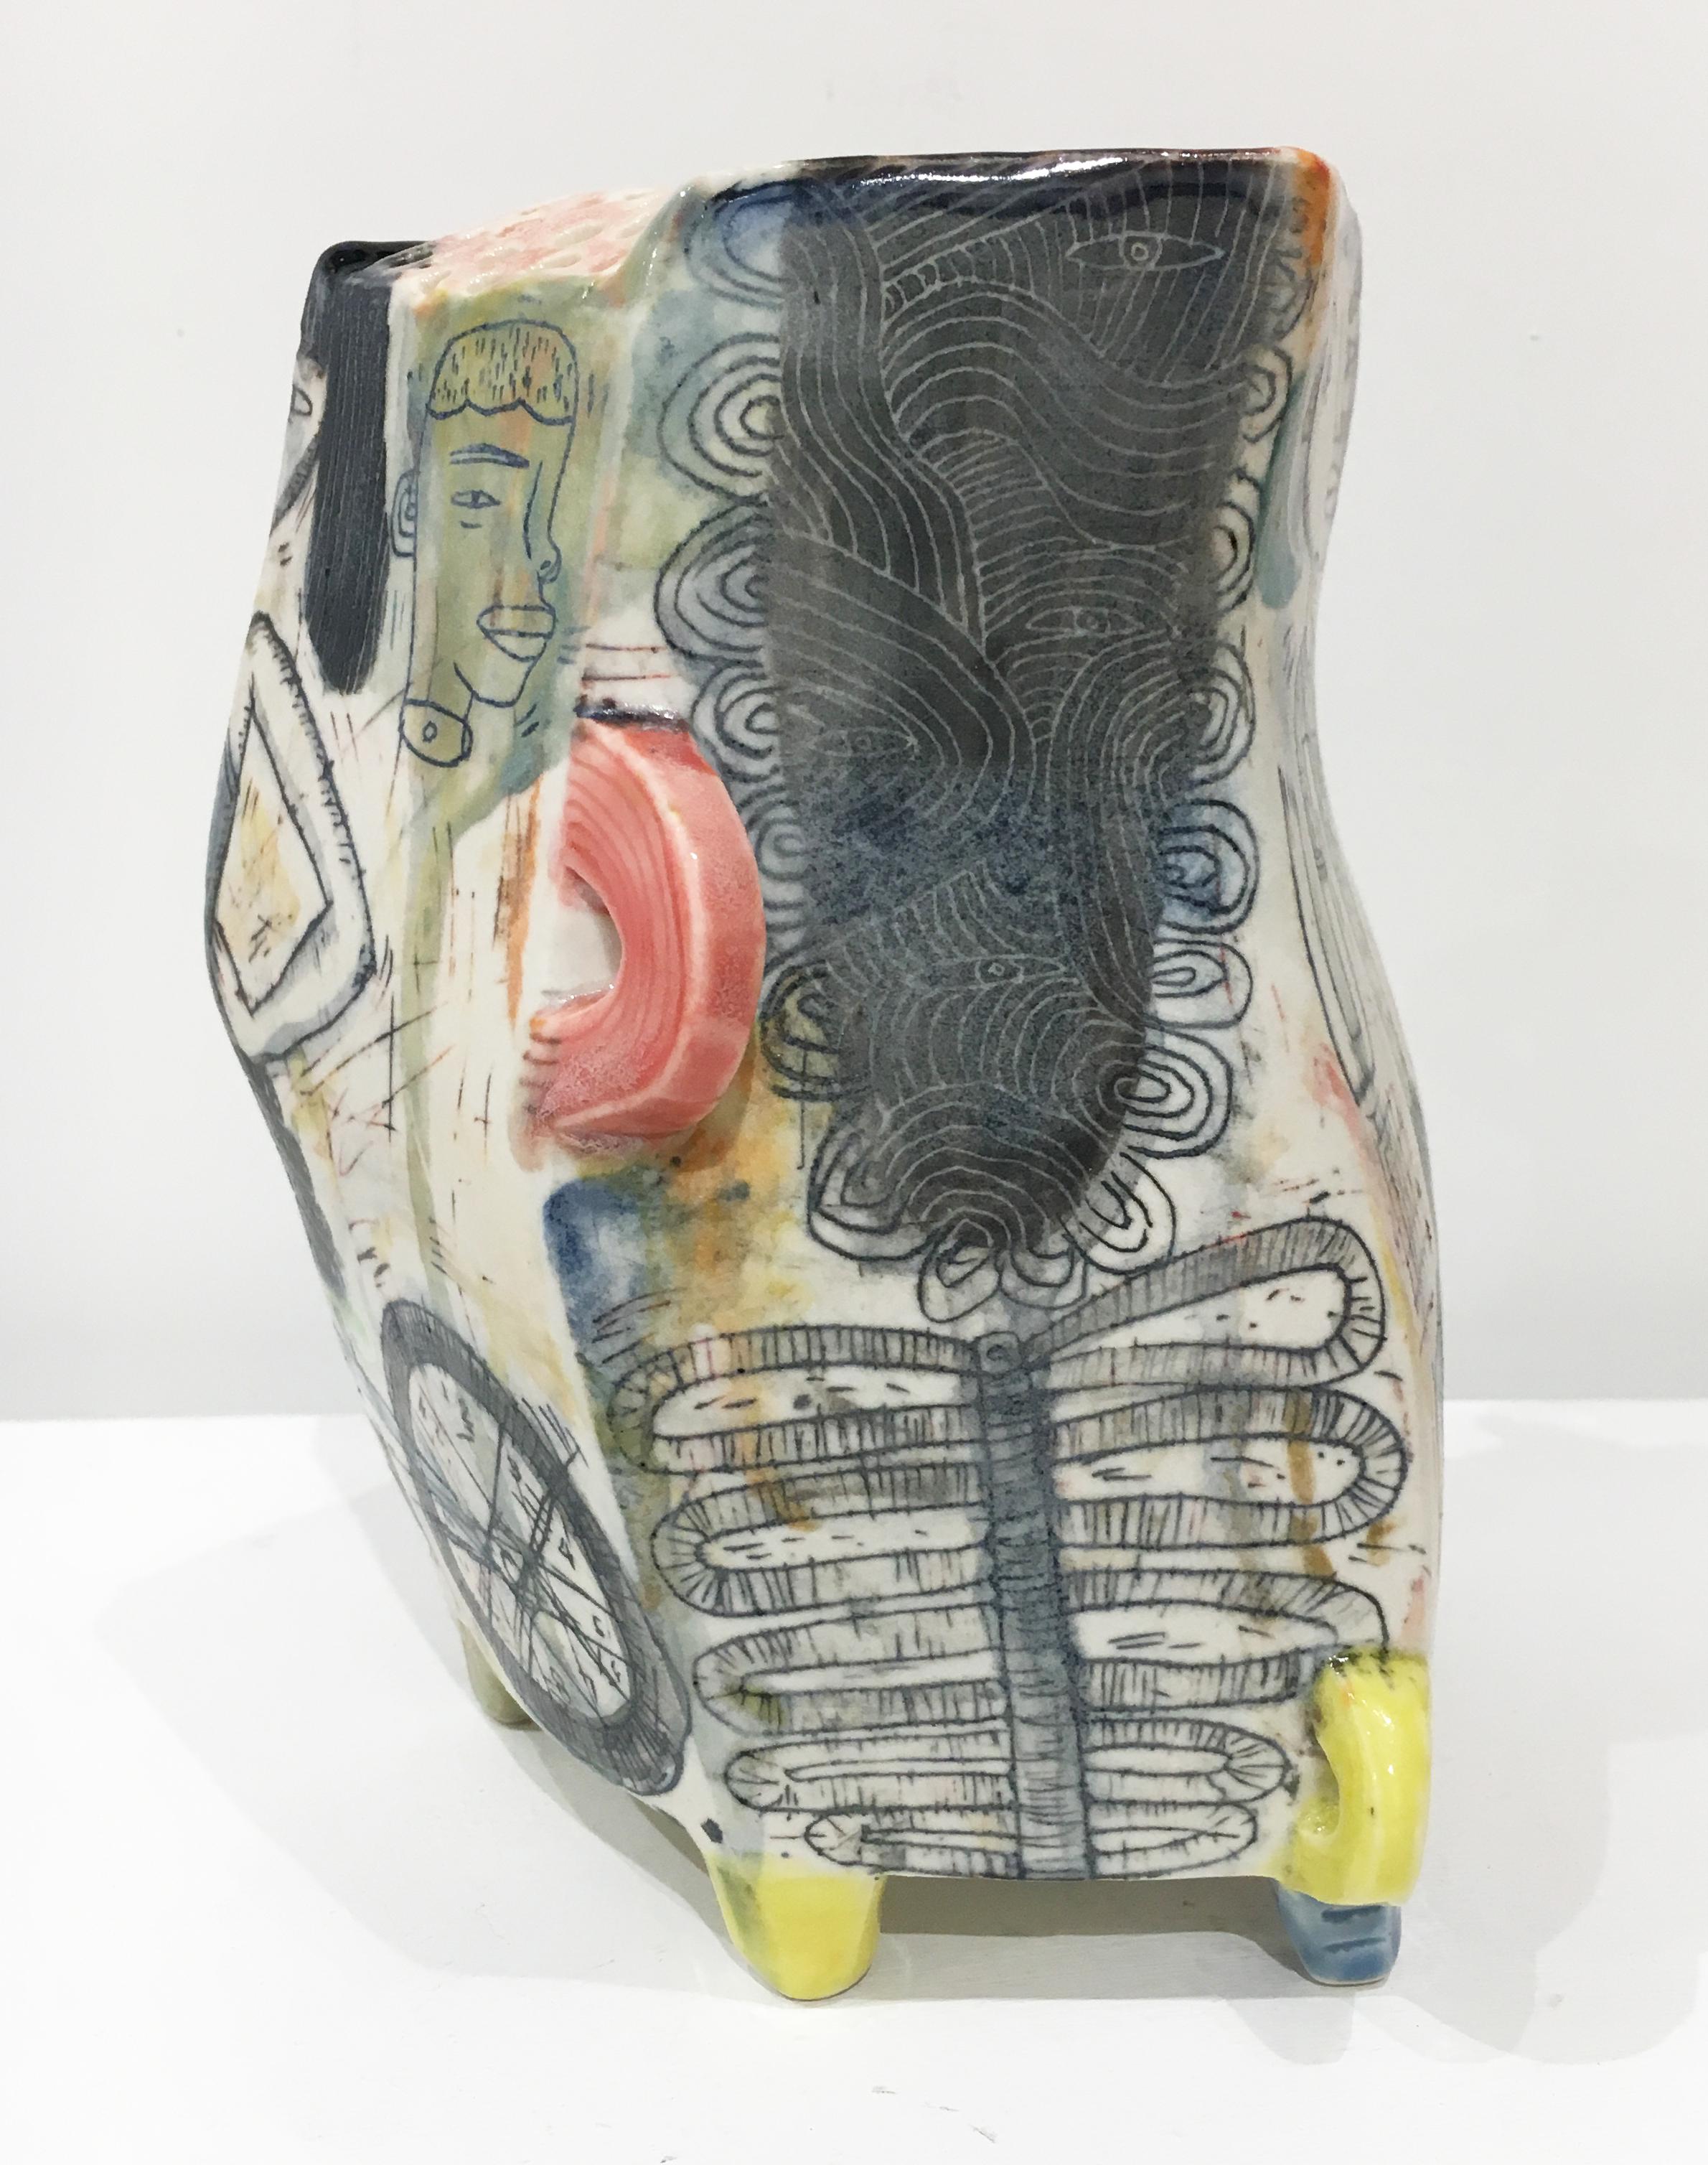 Kevin Snipes creates ceramic vessel forms that act as canvases for self referential narratives that are brought to the viewer through a combination of illustration and symbolism, obscure glyphs, and comical/whimsical motifs. Within the discipline of